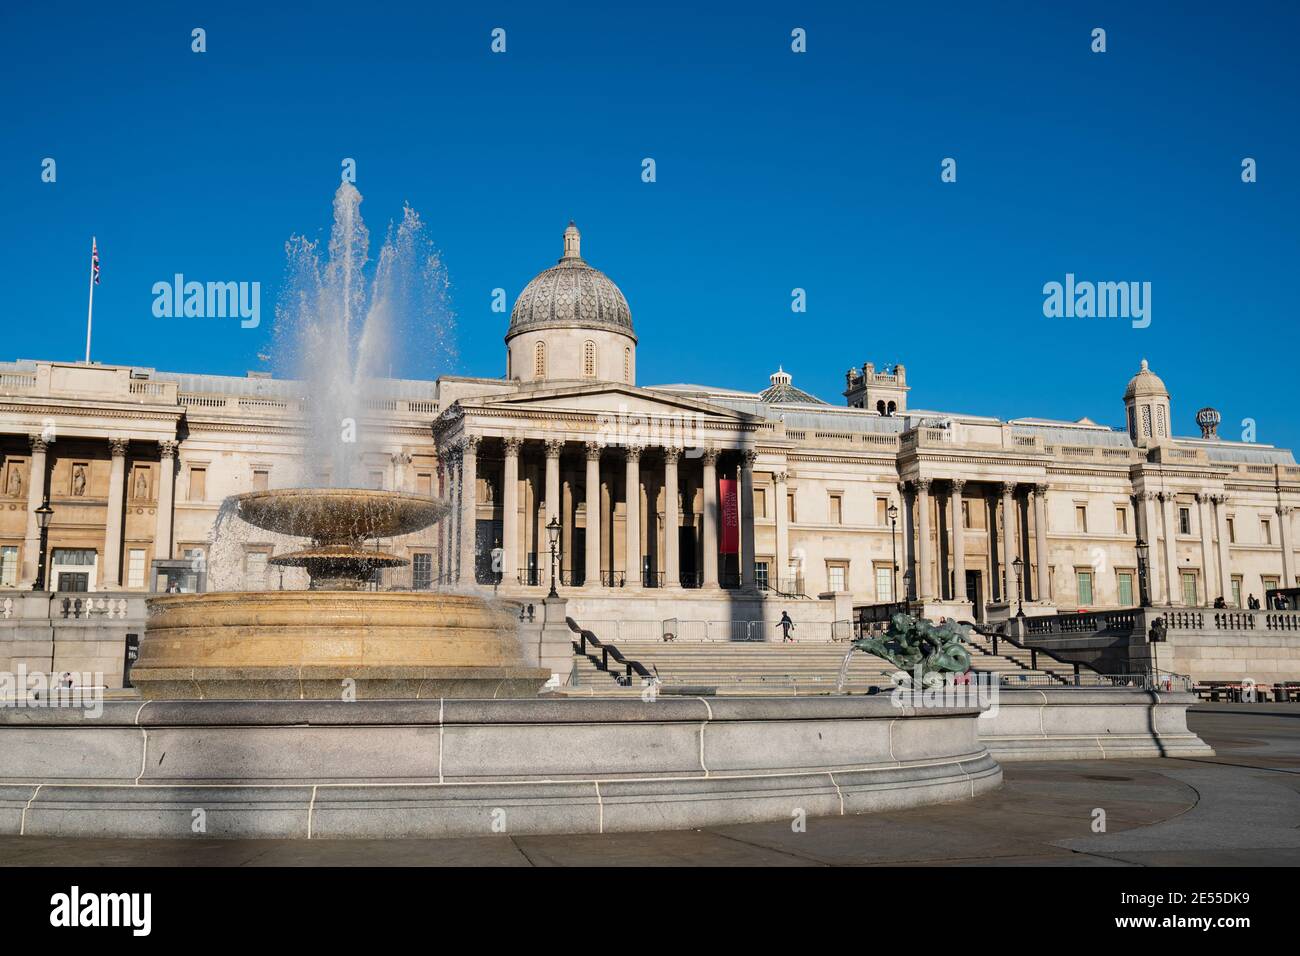 Fountain outside the National Gallery at Trafalgar Square, London, UK Stock Photo